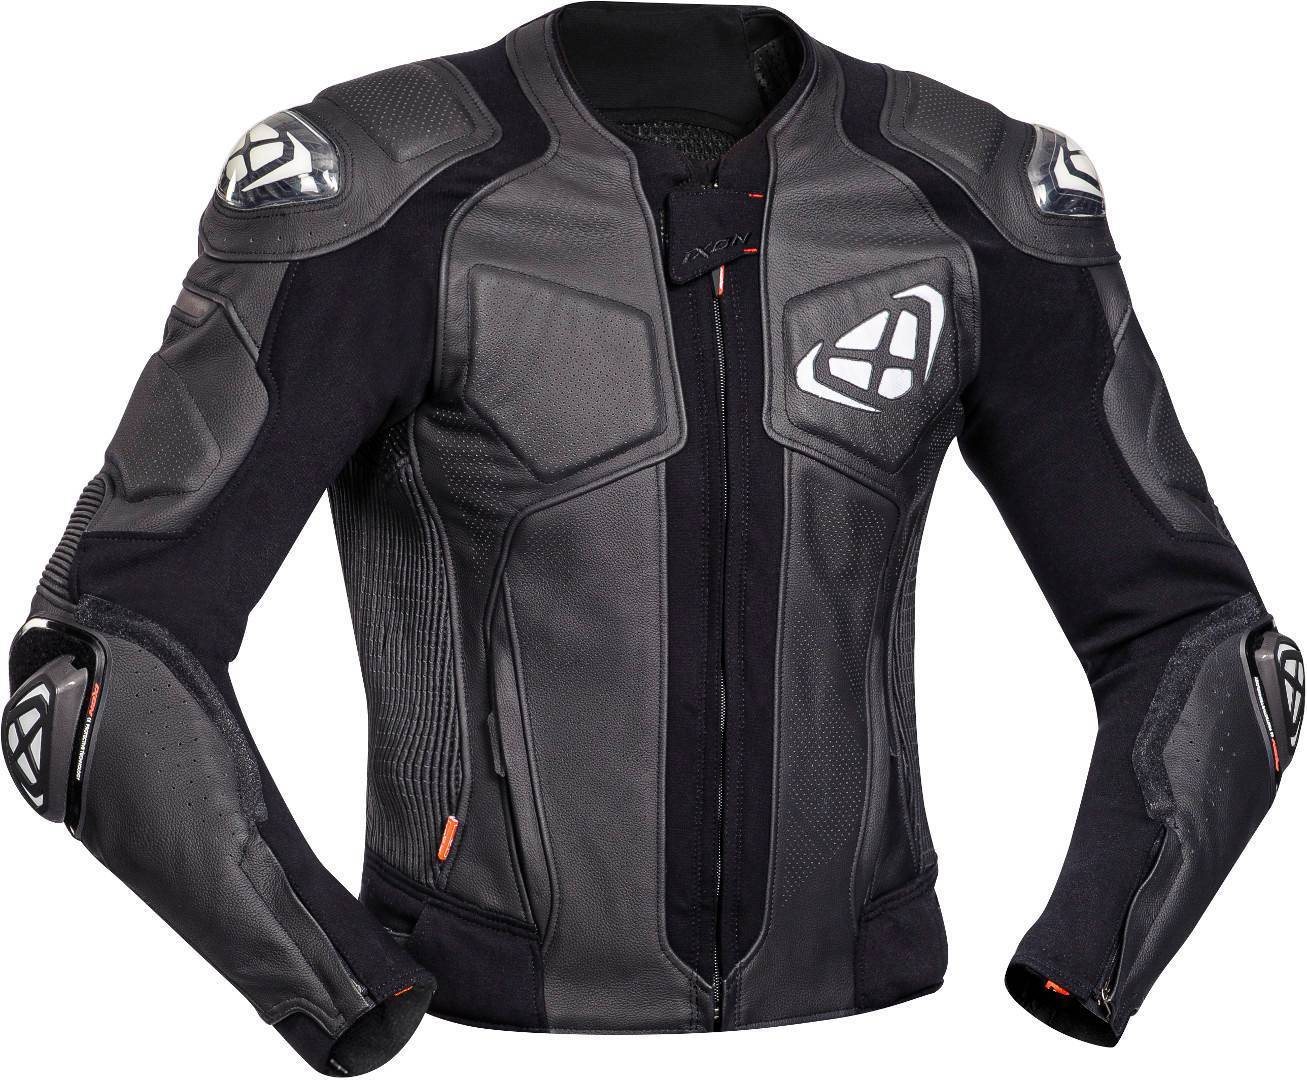 All sizes! "VENDETTA" New Leather Biker Motorcycle Jacket